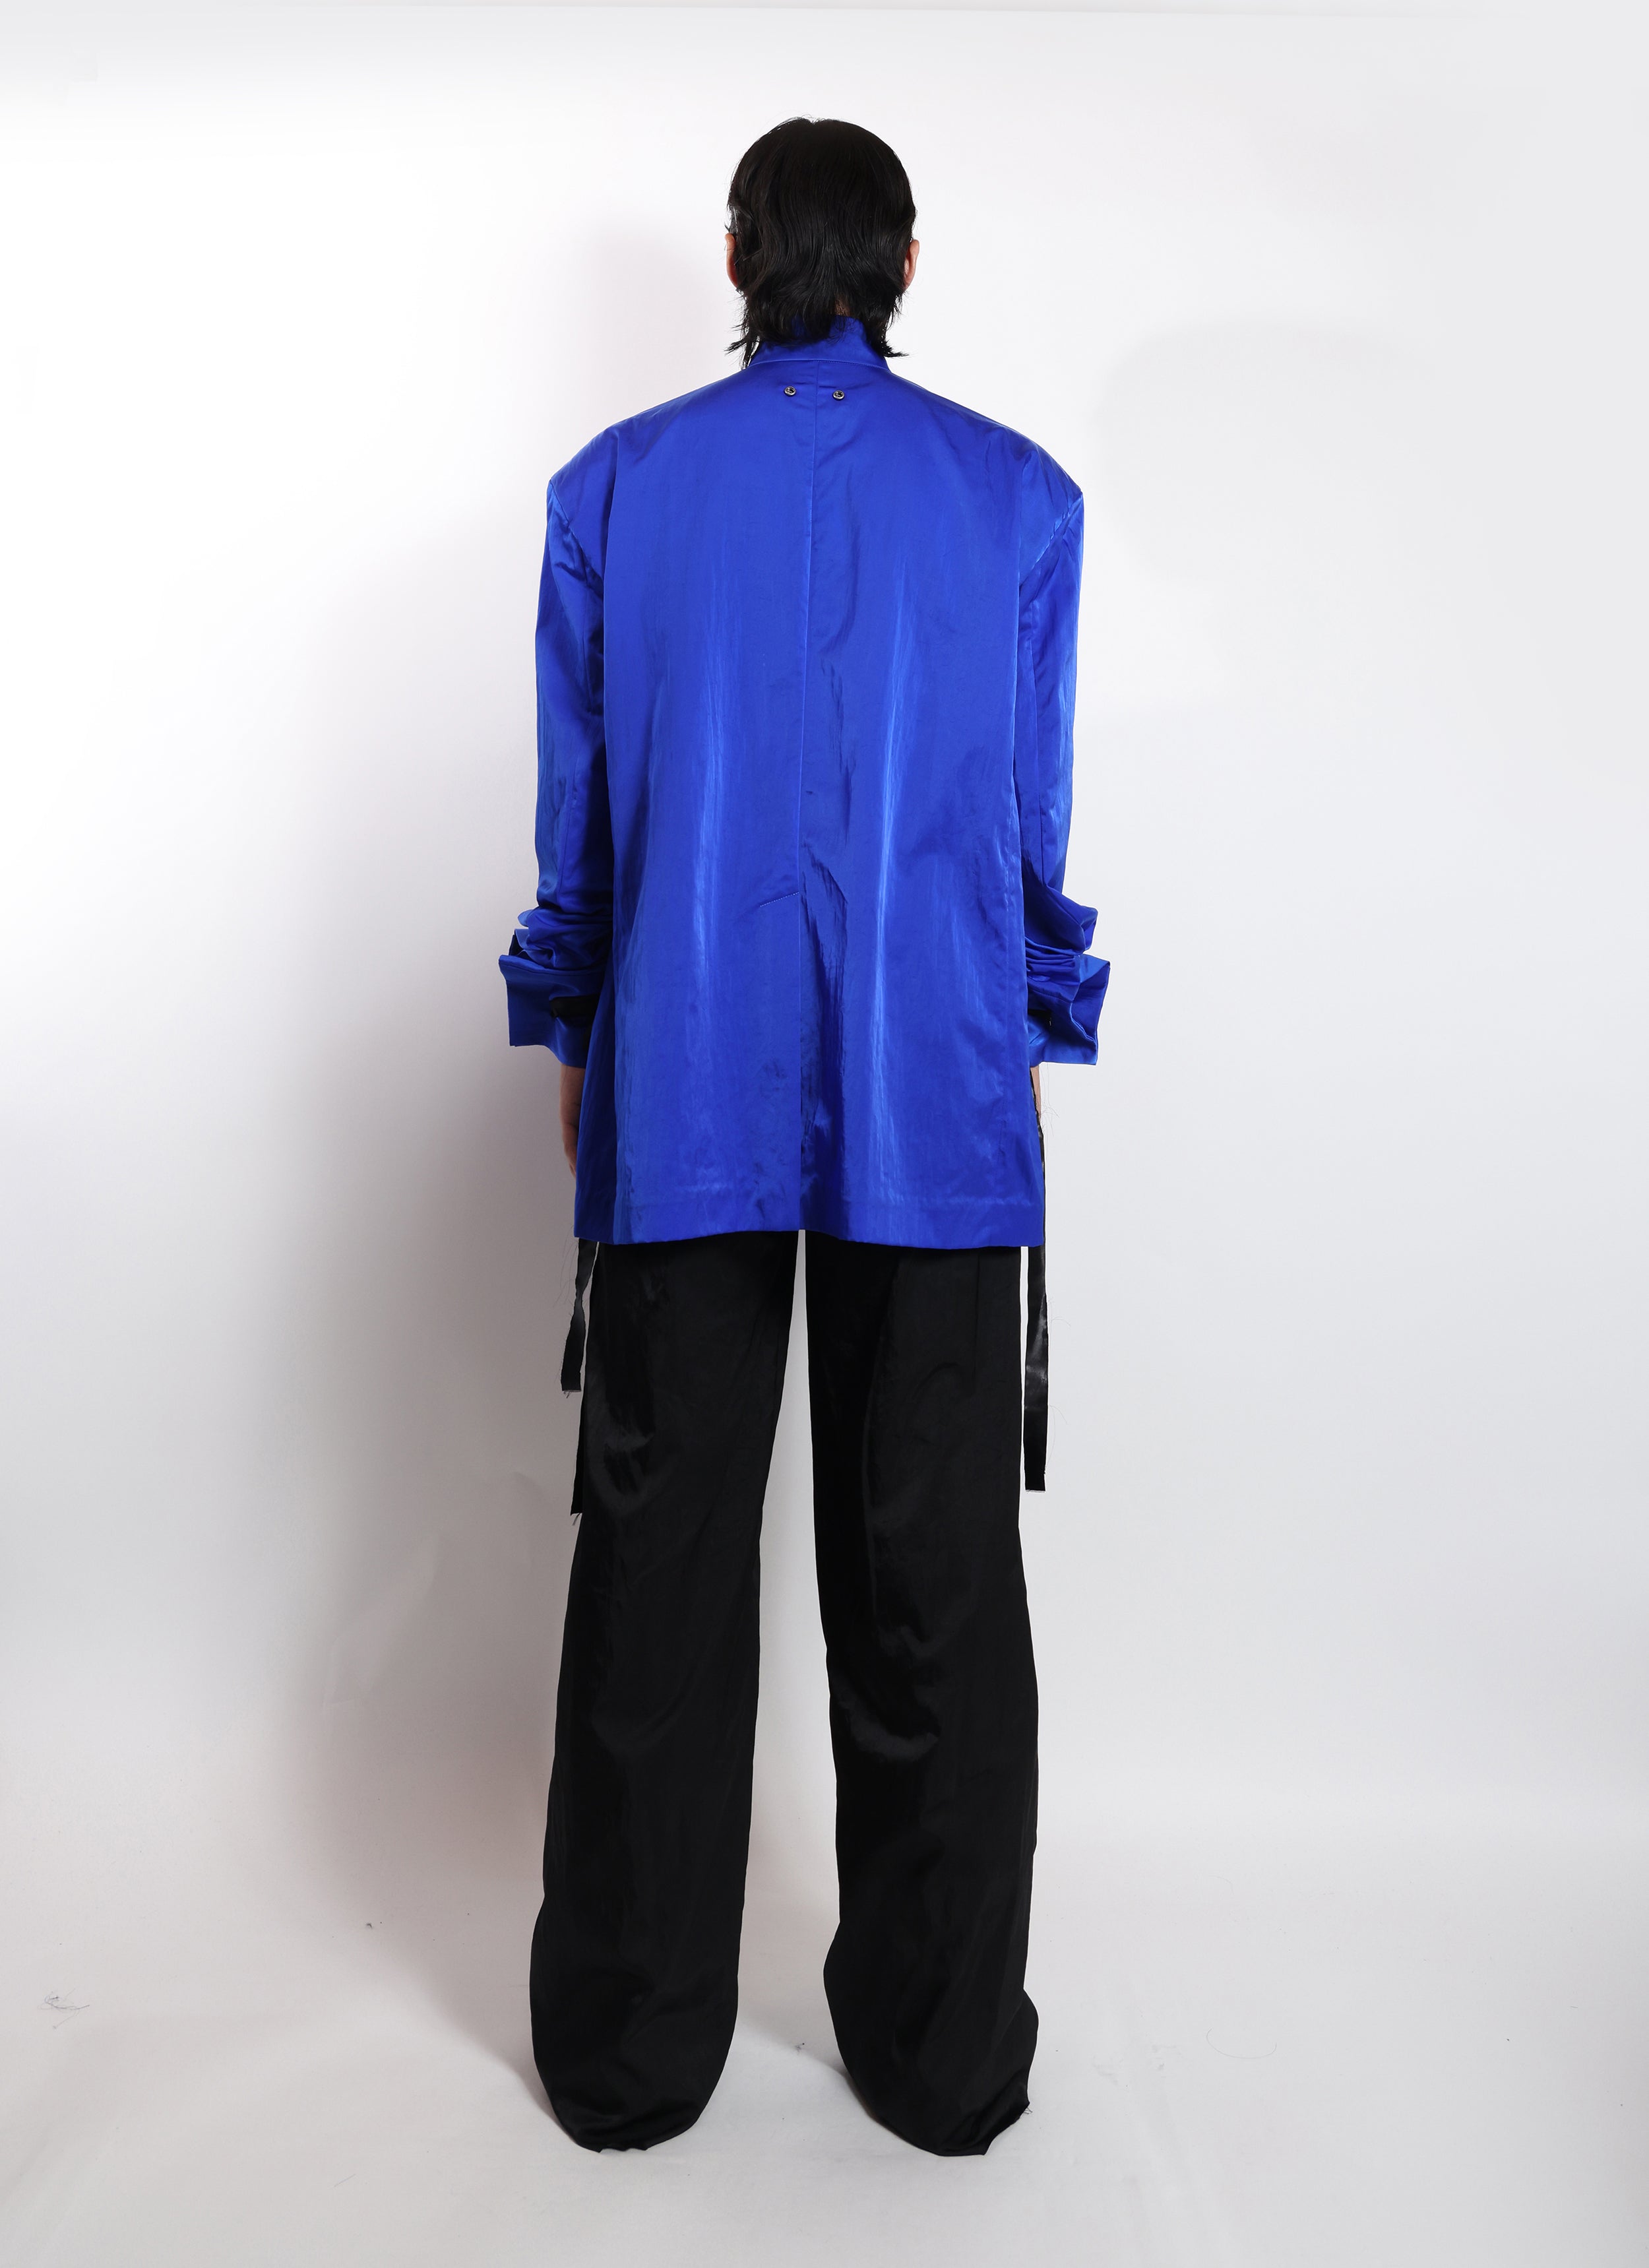 Stand Collar Oversize Suit